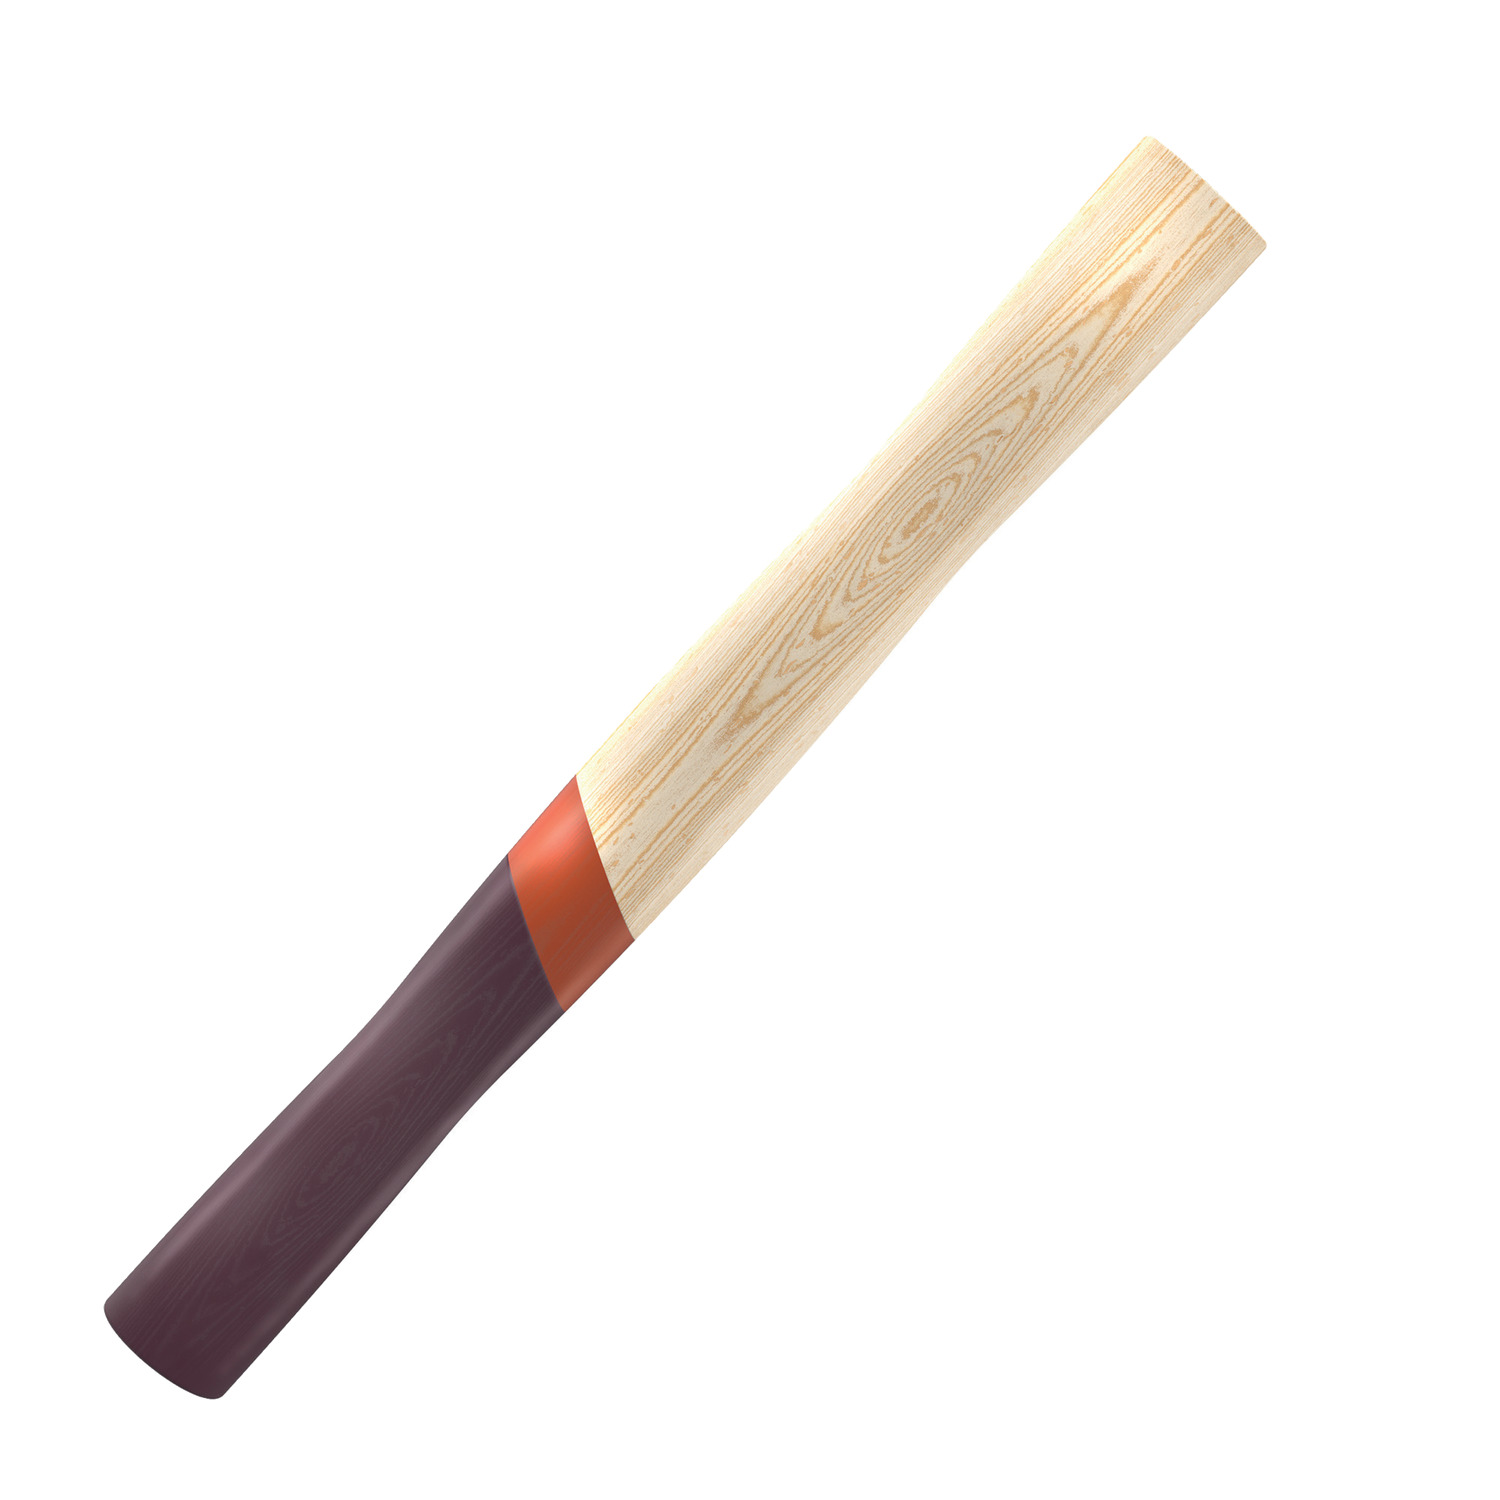 Product 98383, Handle - for Split Maul Mallets wood - for no. 98381 / 